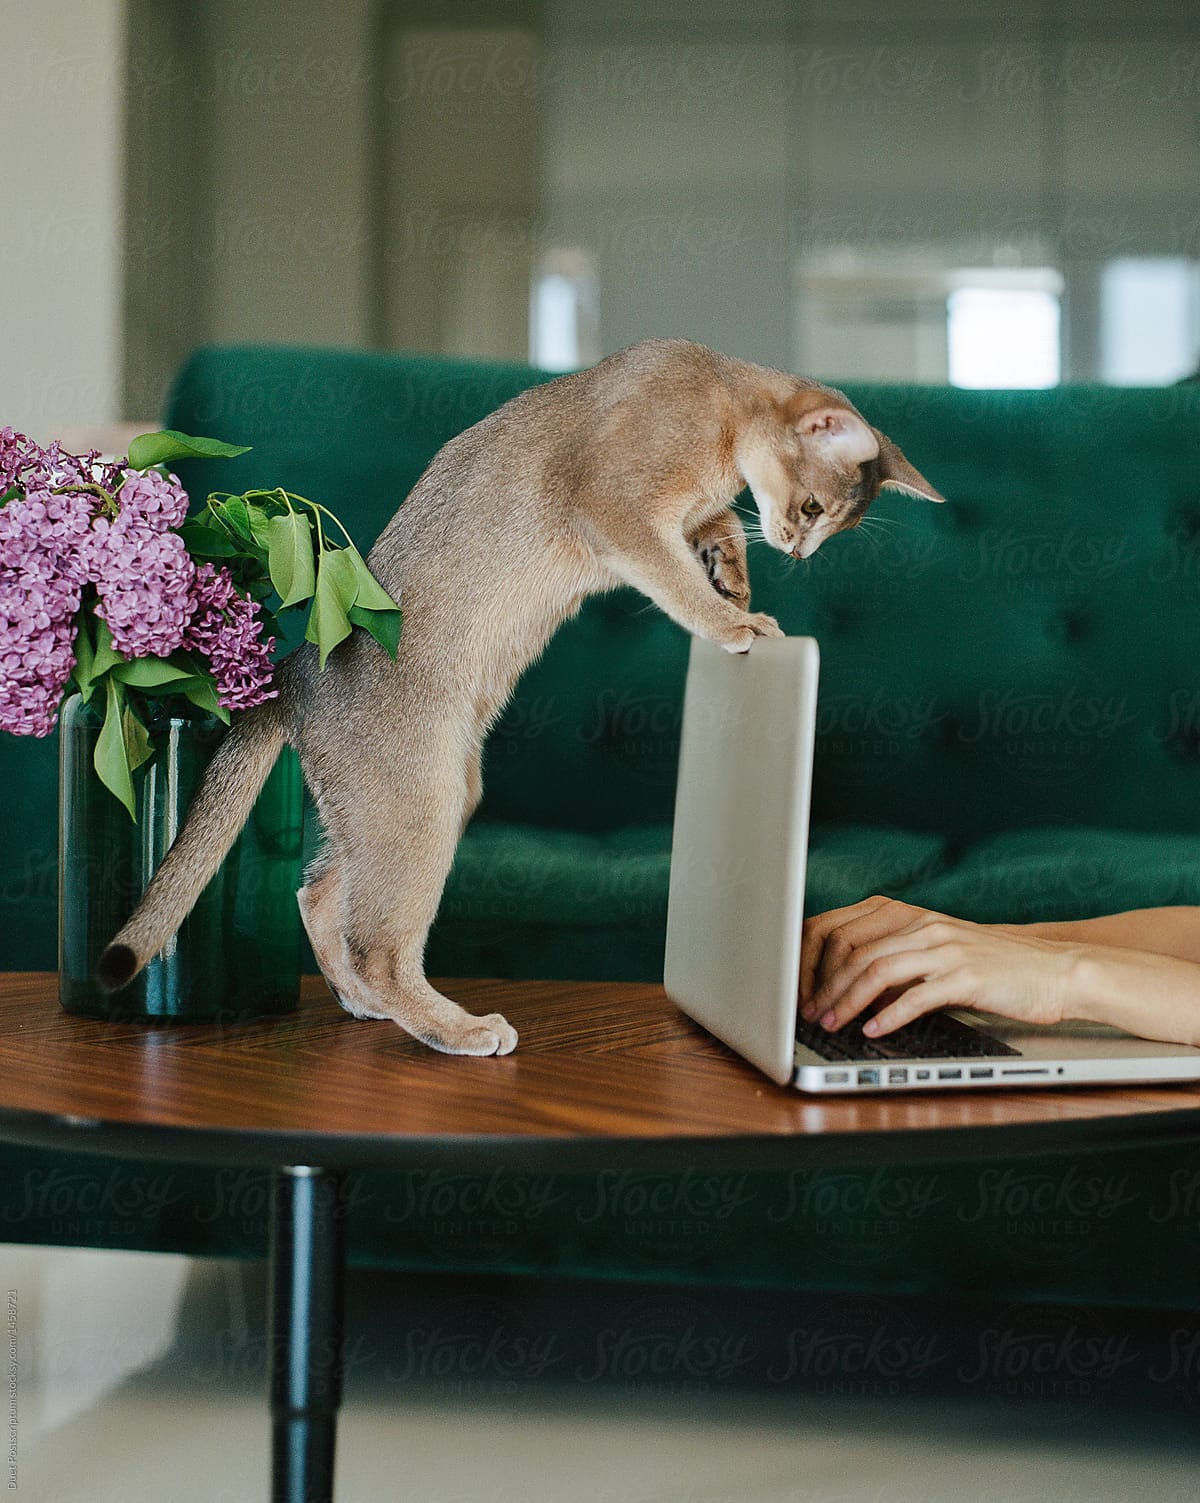 A kitten looks at the person who works for the laptop